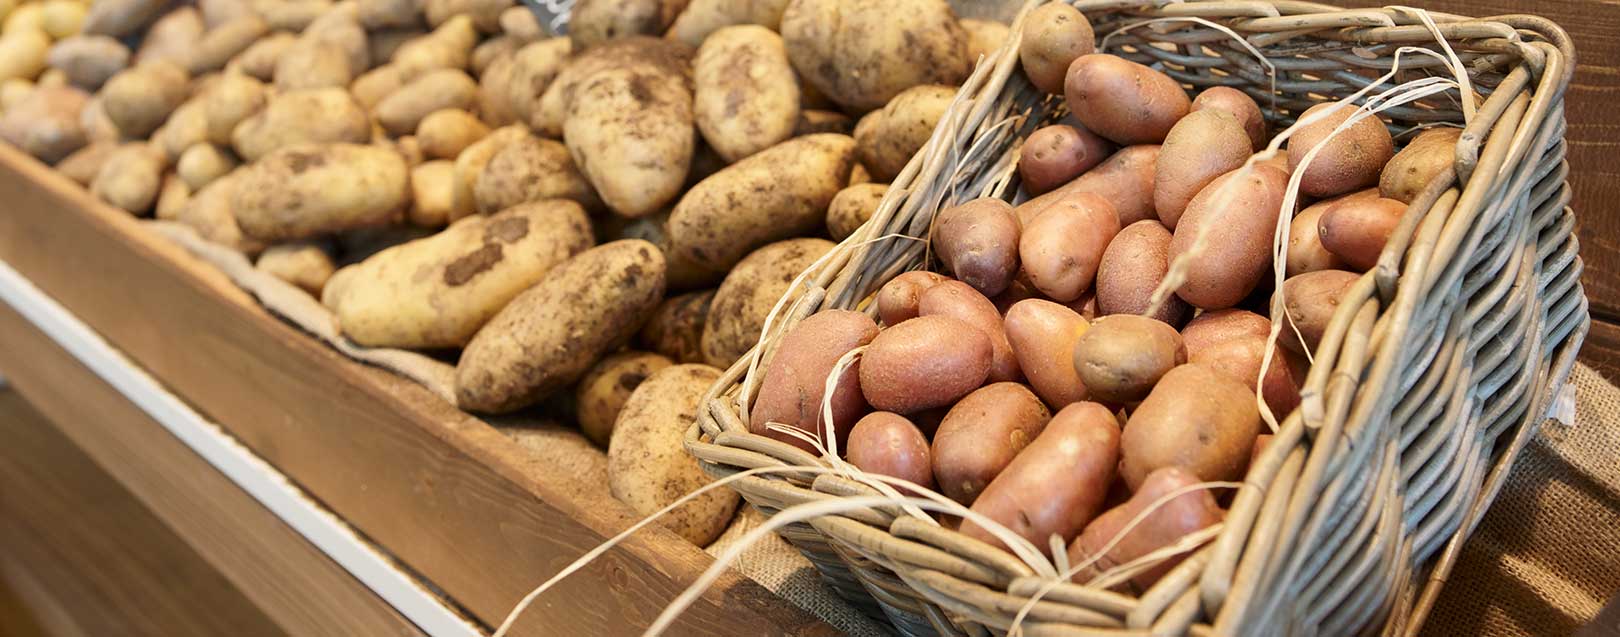 UP govt to buy one lakh metric tonne of potatoes at Rs 487 per quintal